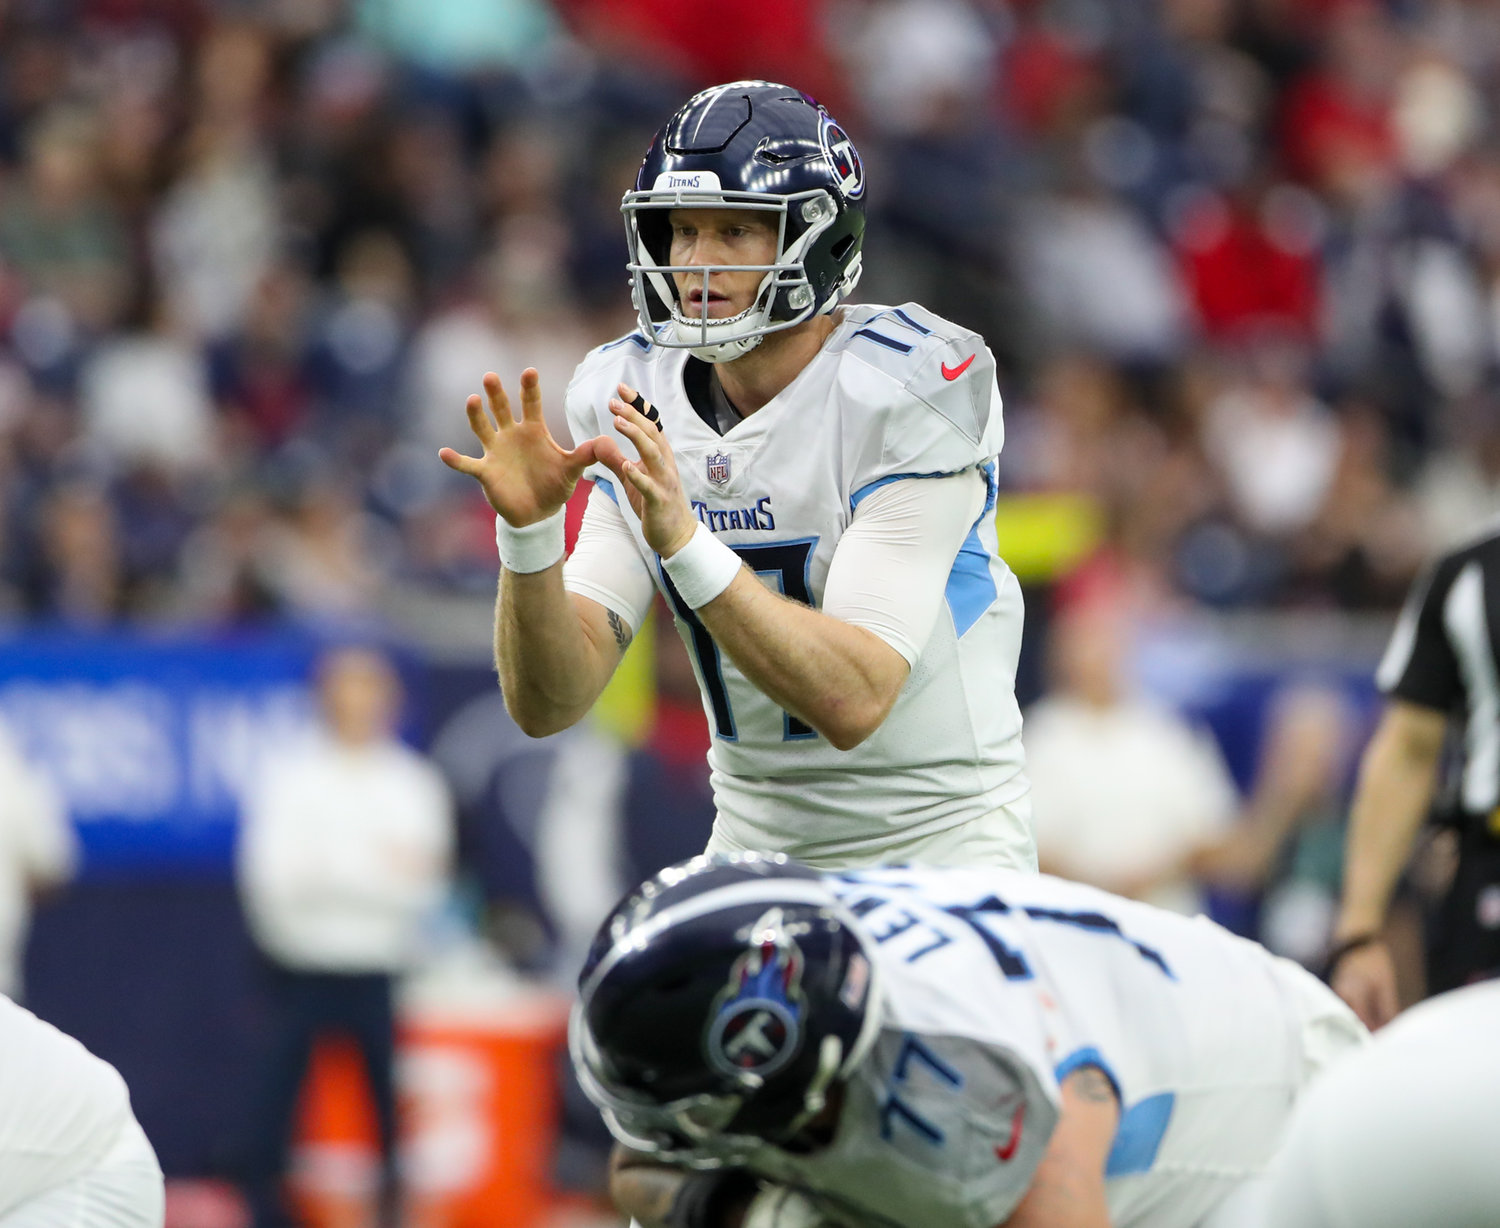 Tennessee Titans quarterback Ryan Tannehill (17) prepares for a snap during an NFL game between the Texans and the Titans on Jan. 9, 2022 in Houston, Texas.